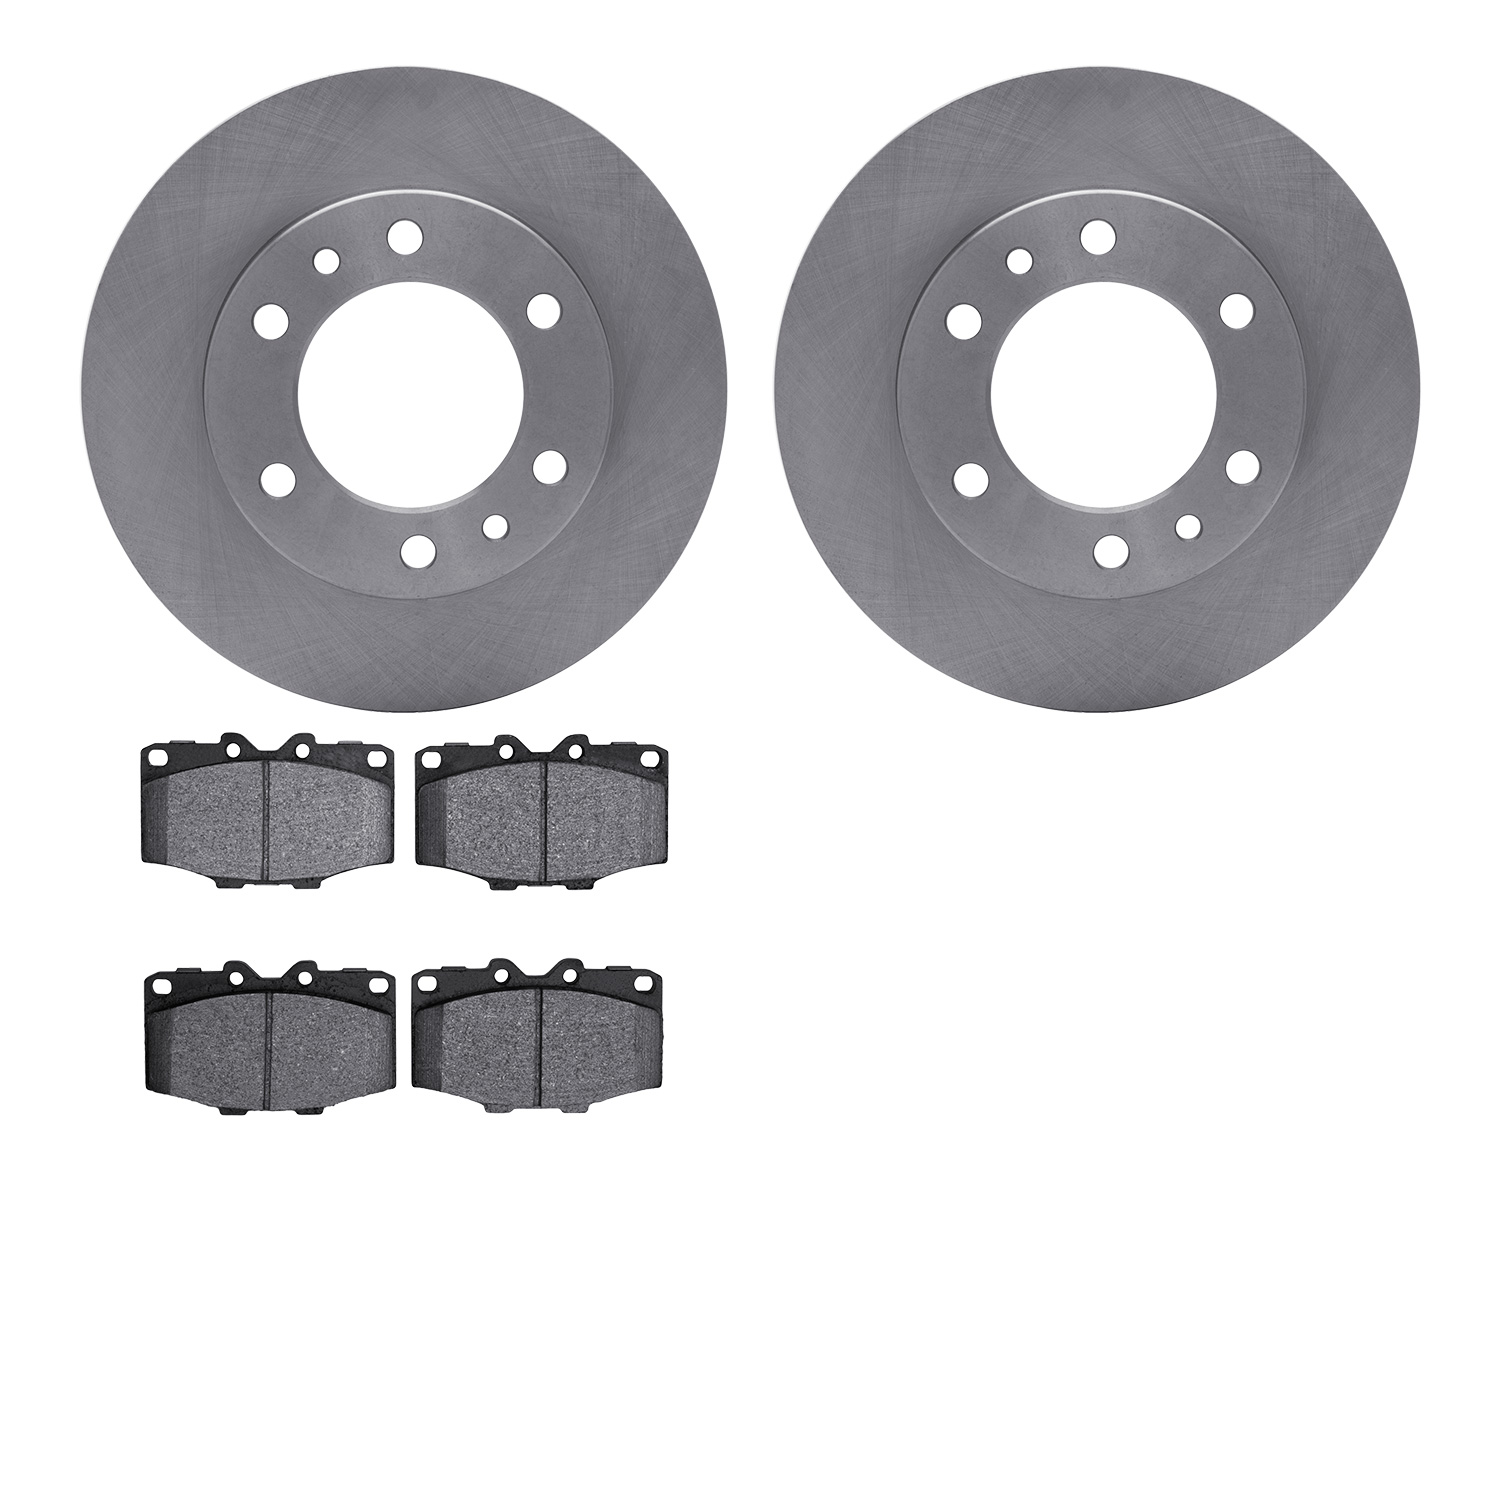 6402-76007 Brake Rotors with Ultimate-Duty Brake Pads, 1981-1985 Lexus/Toyota/Scion, Position: Front